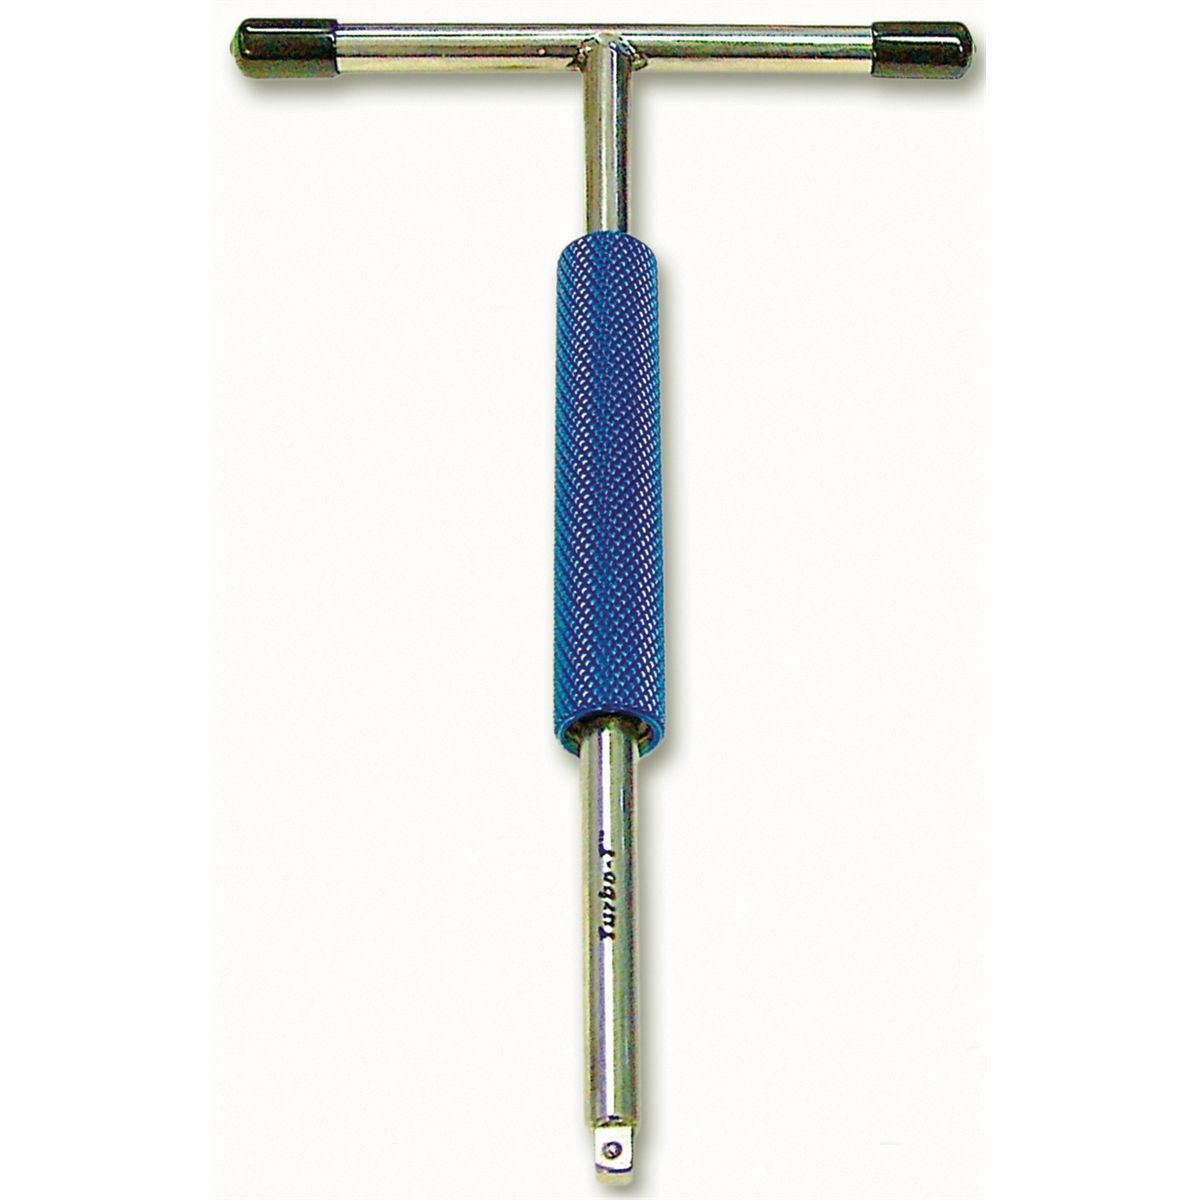 Turbo-T 1/4" Drive Speed "T" Handle Wrench